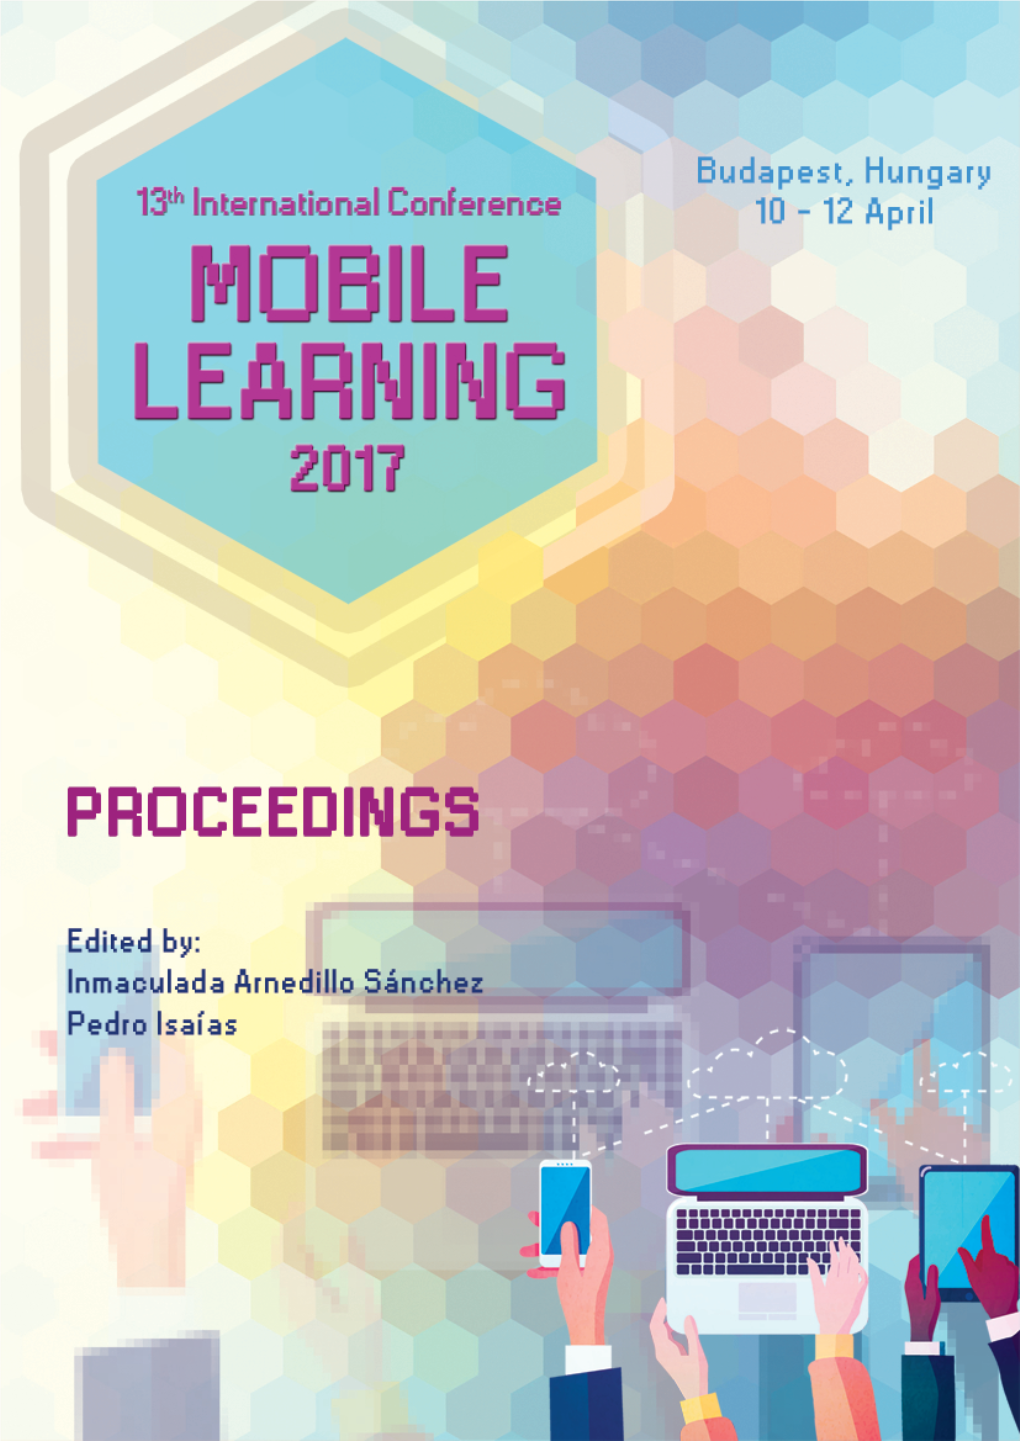 Mobile Learning 2017